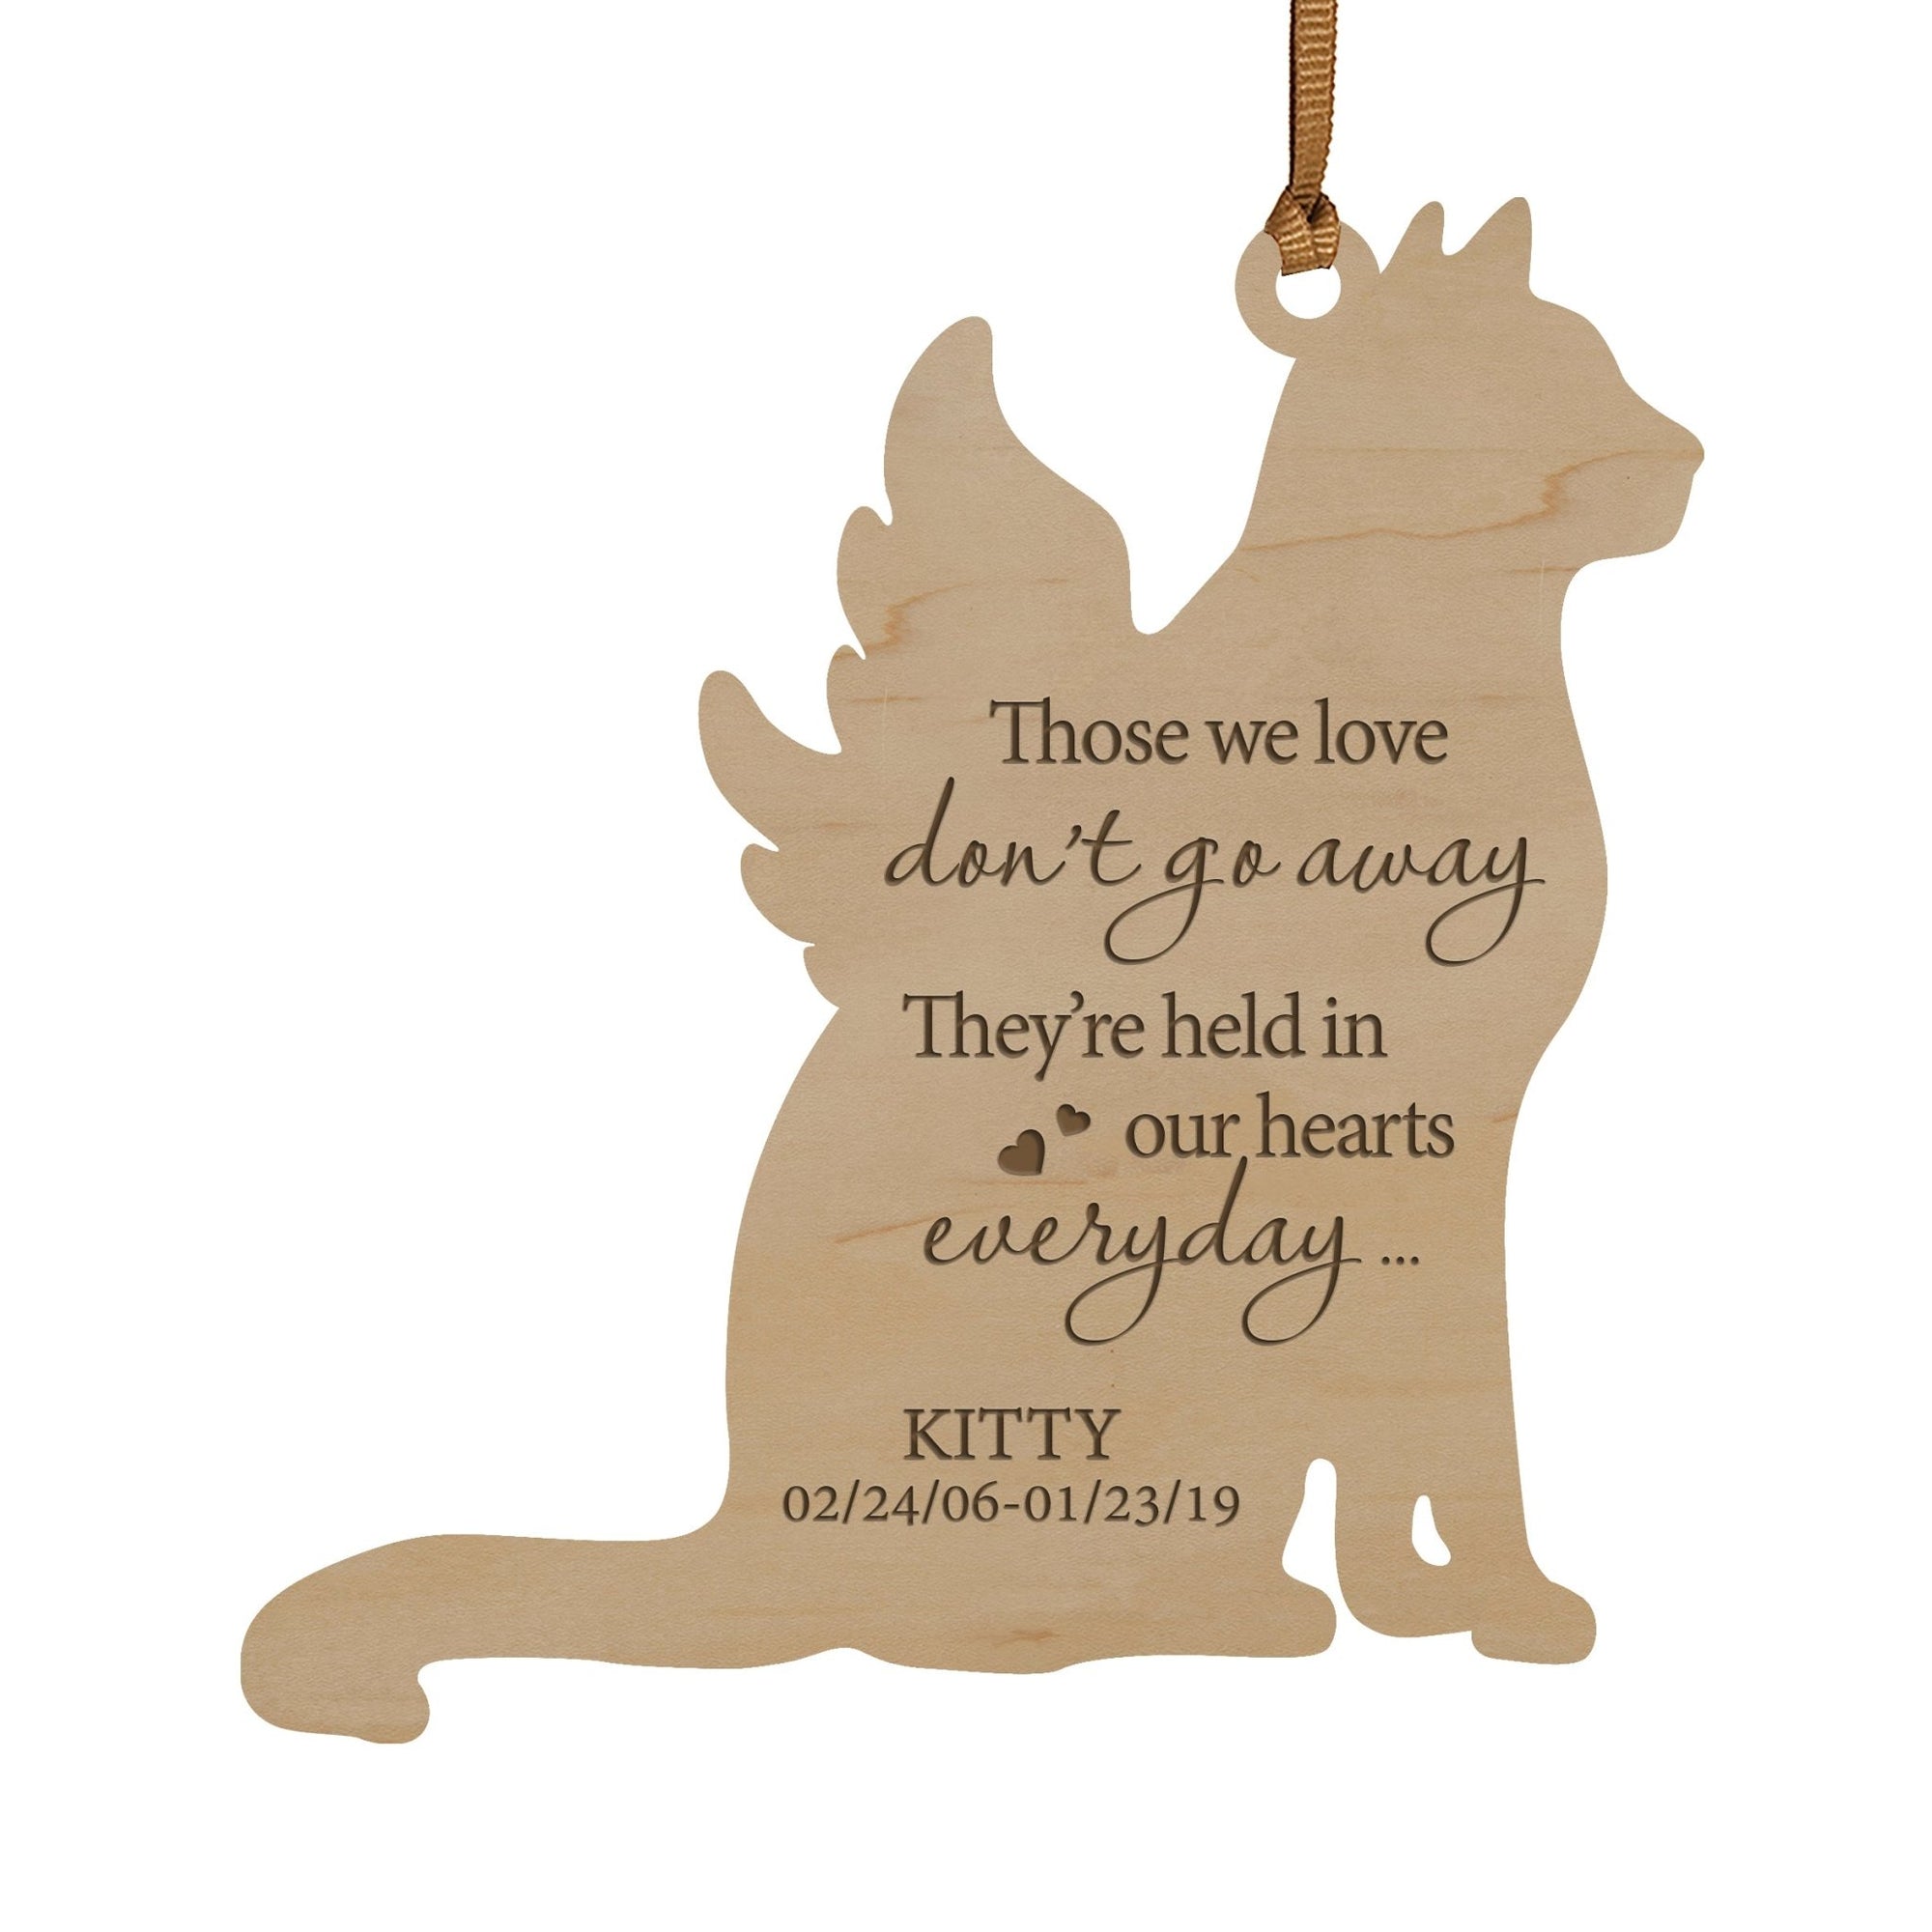 Personalized Engraved Memorial Cat Ornament 4.9375” x 5.375” x 0.125” - Those we love don’t go away (HEARTS) - LifeSong Milestones